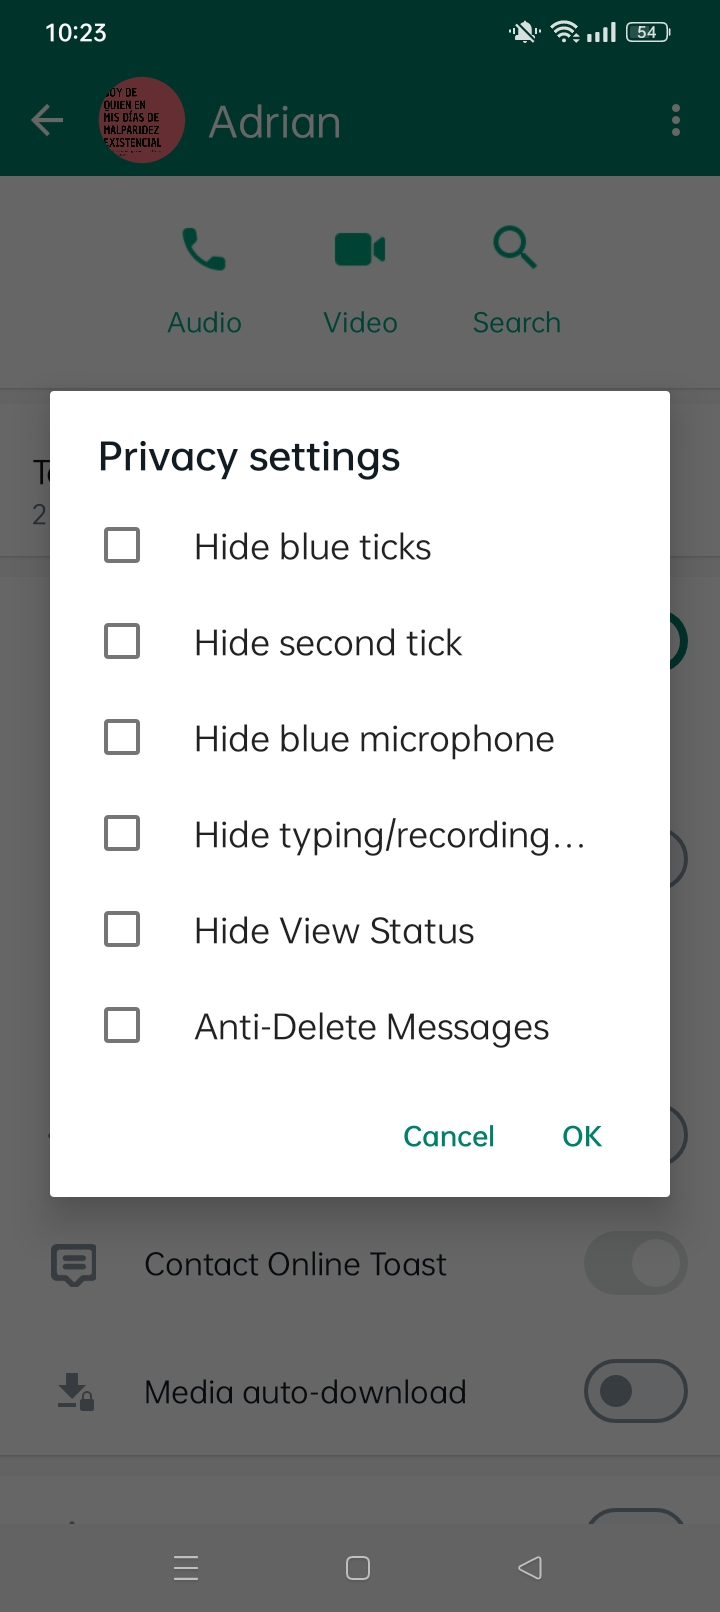 gb-whatsapp-pro-privacy-settings-for-particular-contact